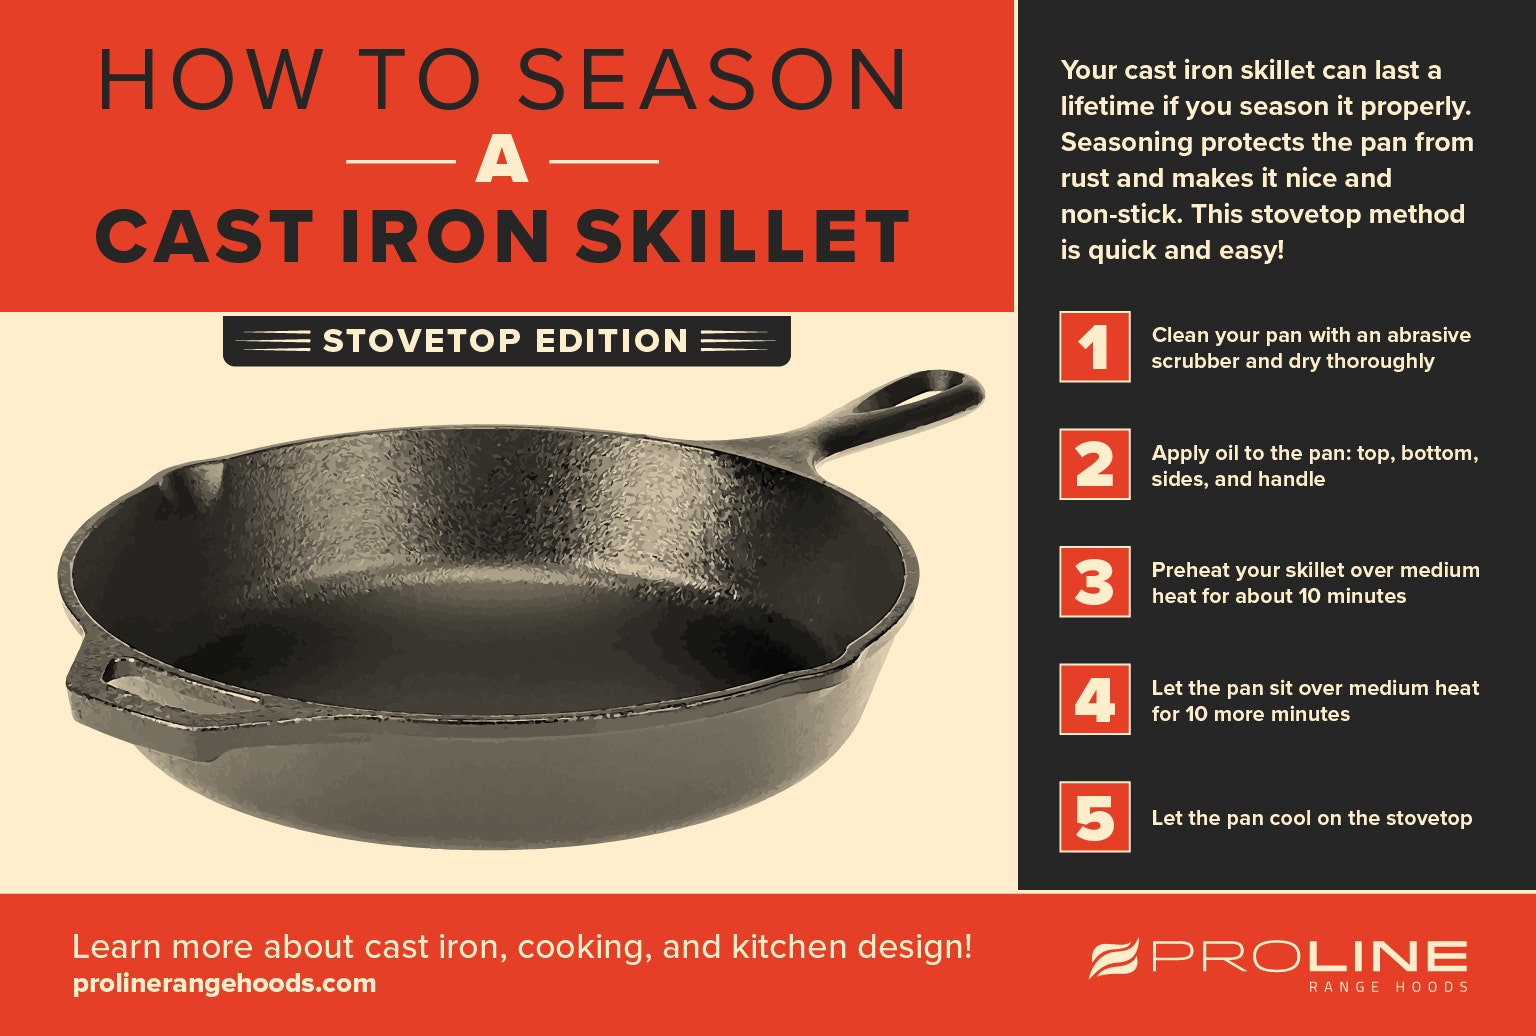 How to Clean a Cast-Iron Skillet: Step-by-Step Instructions